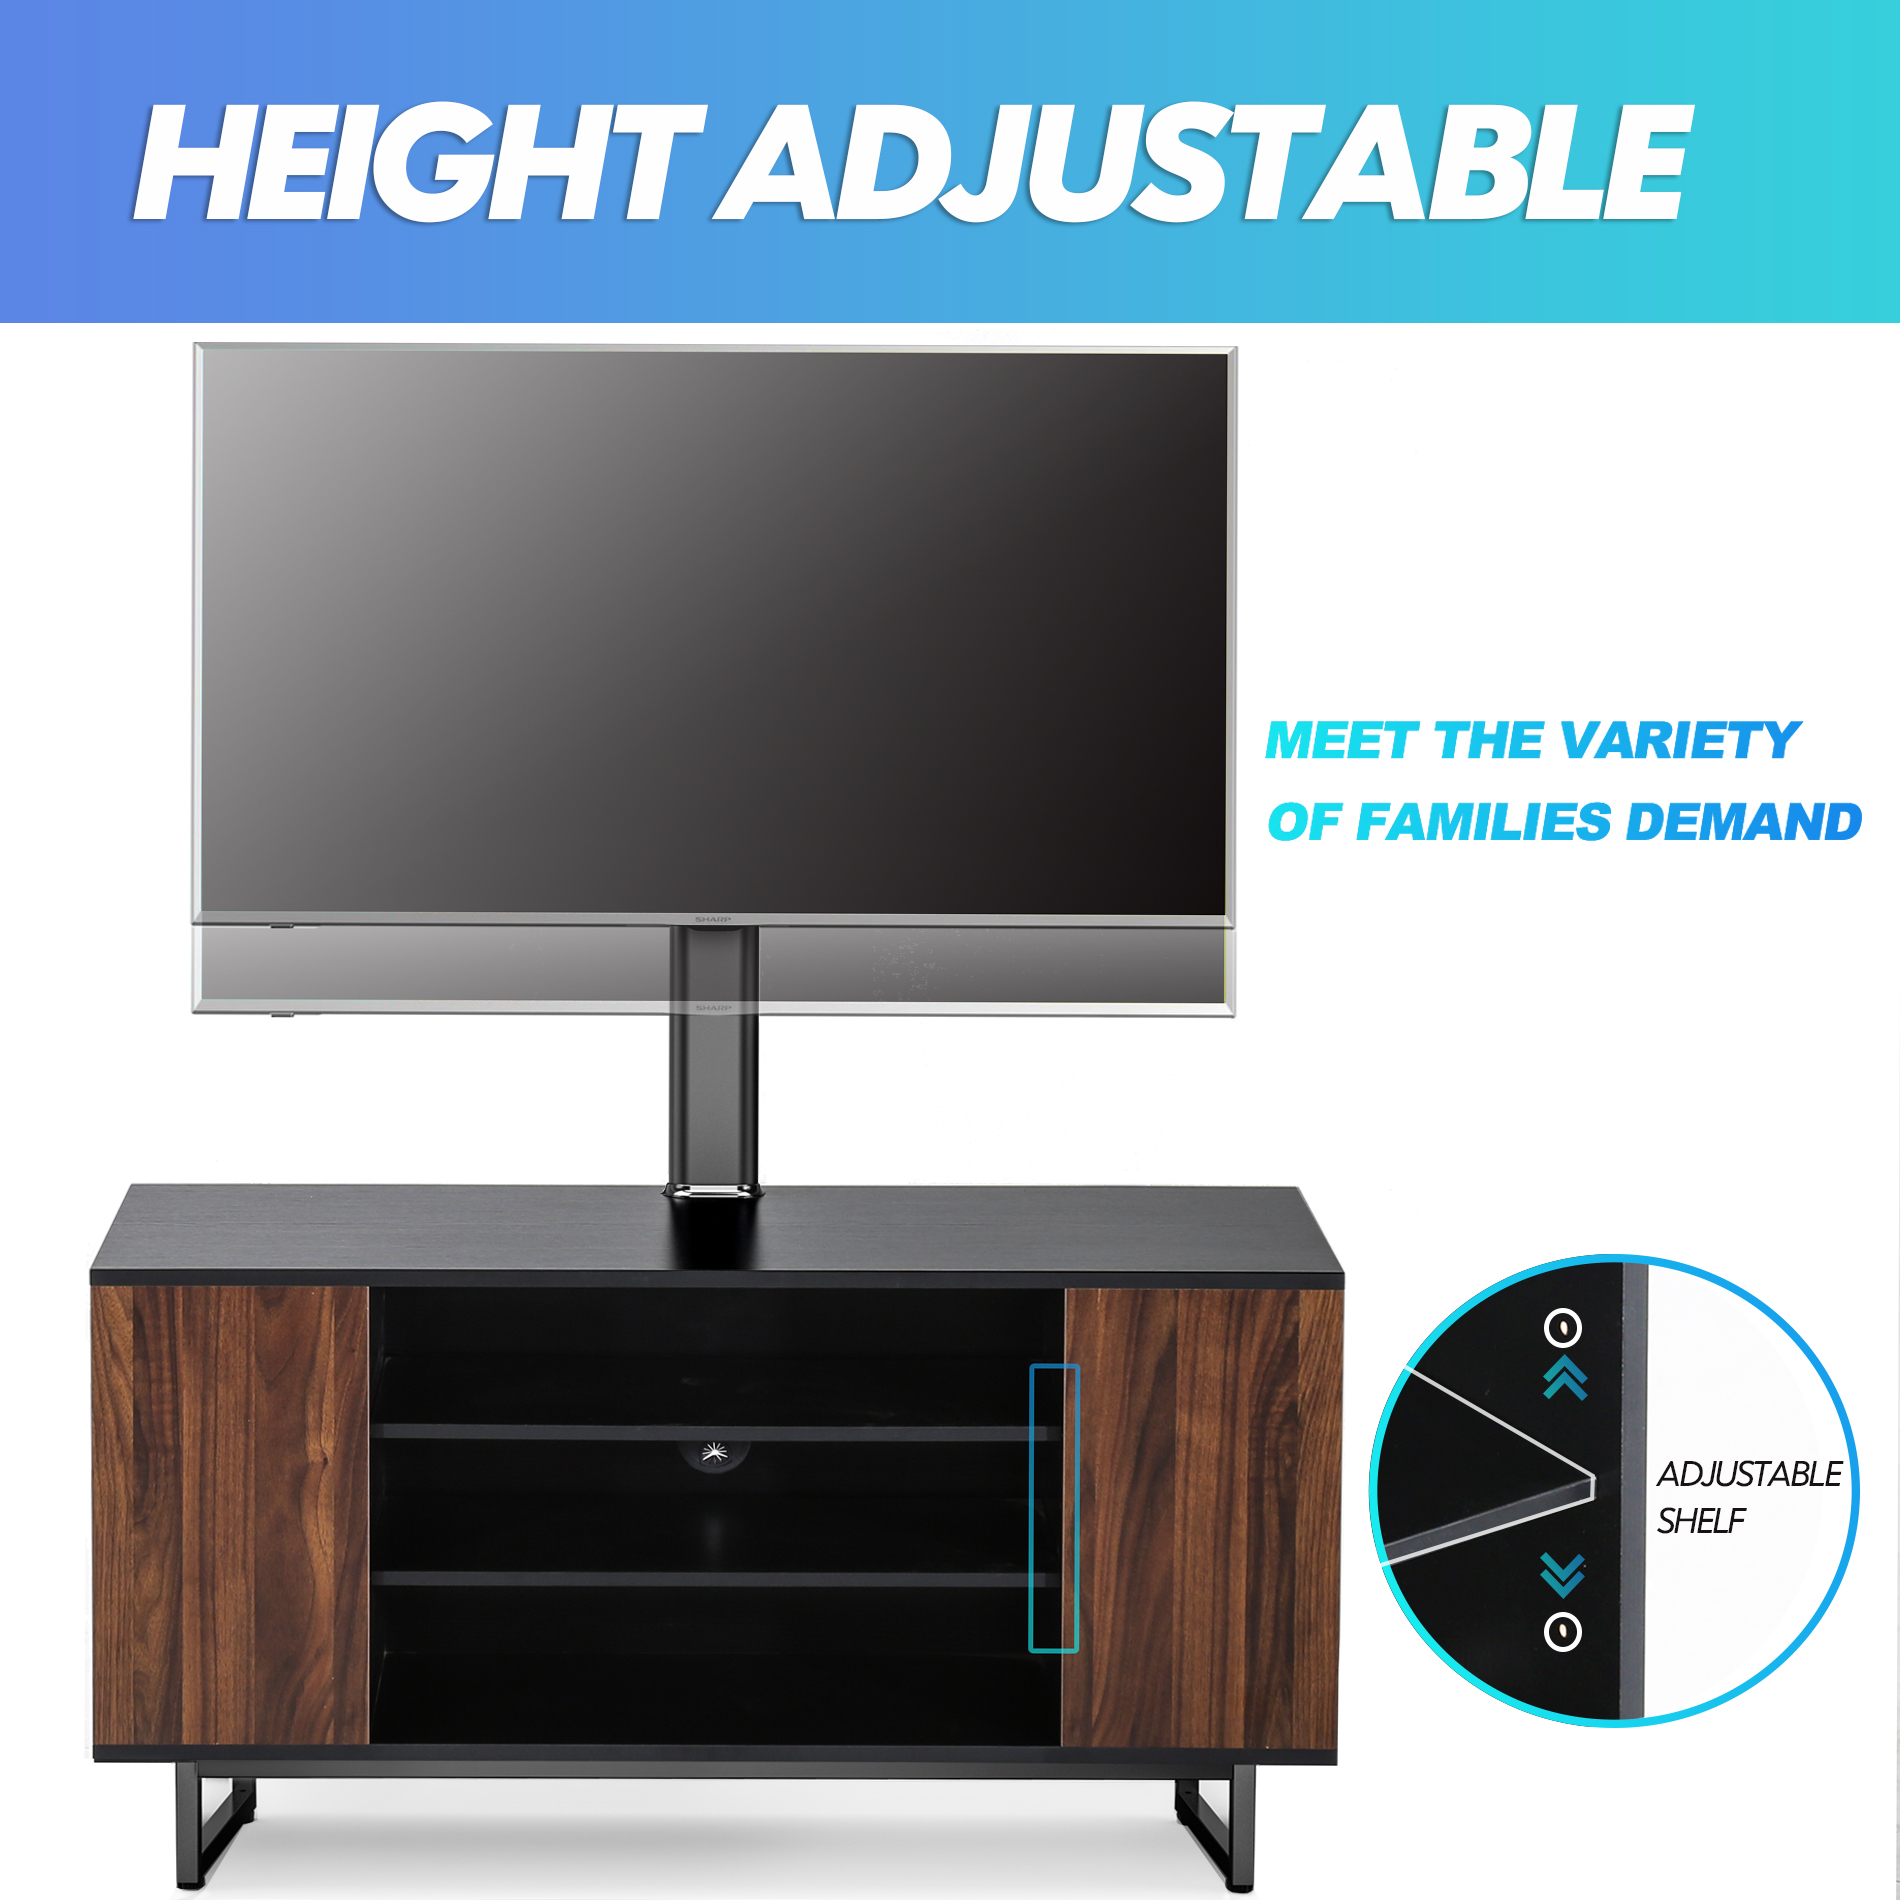 FITUEYES Universal TV Stand Base - Floor TV Stand with Swivel Mount for 32-70 inch Height Adjustable Media Storage Stand Wooden Shelves for Media Player TW310601MB - image 4 of 7